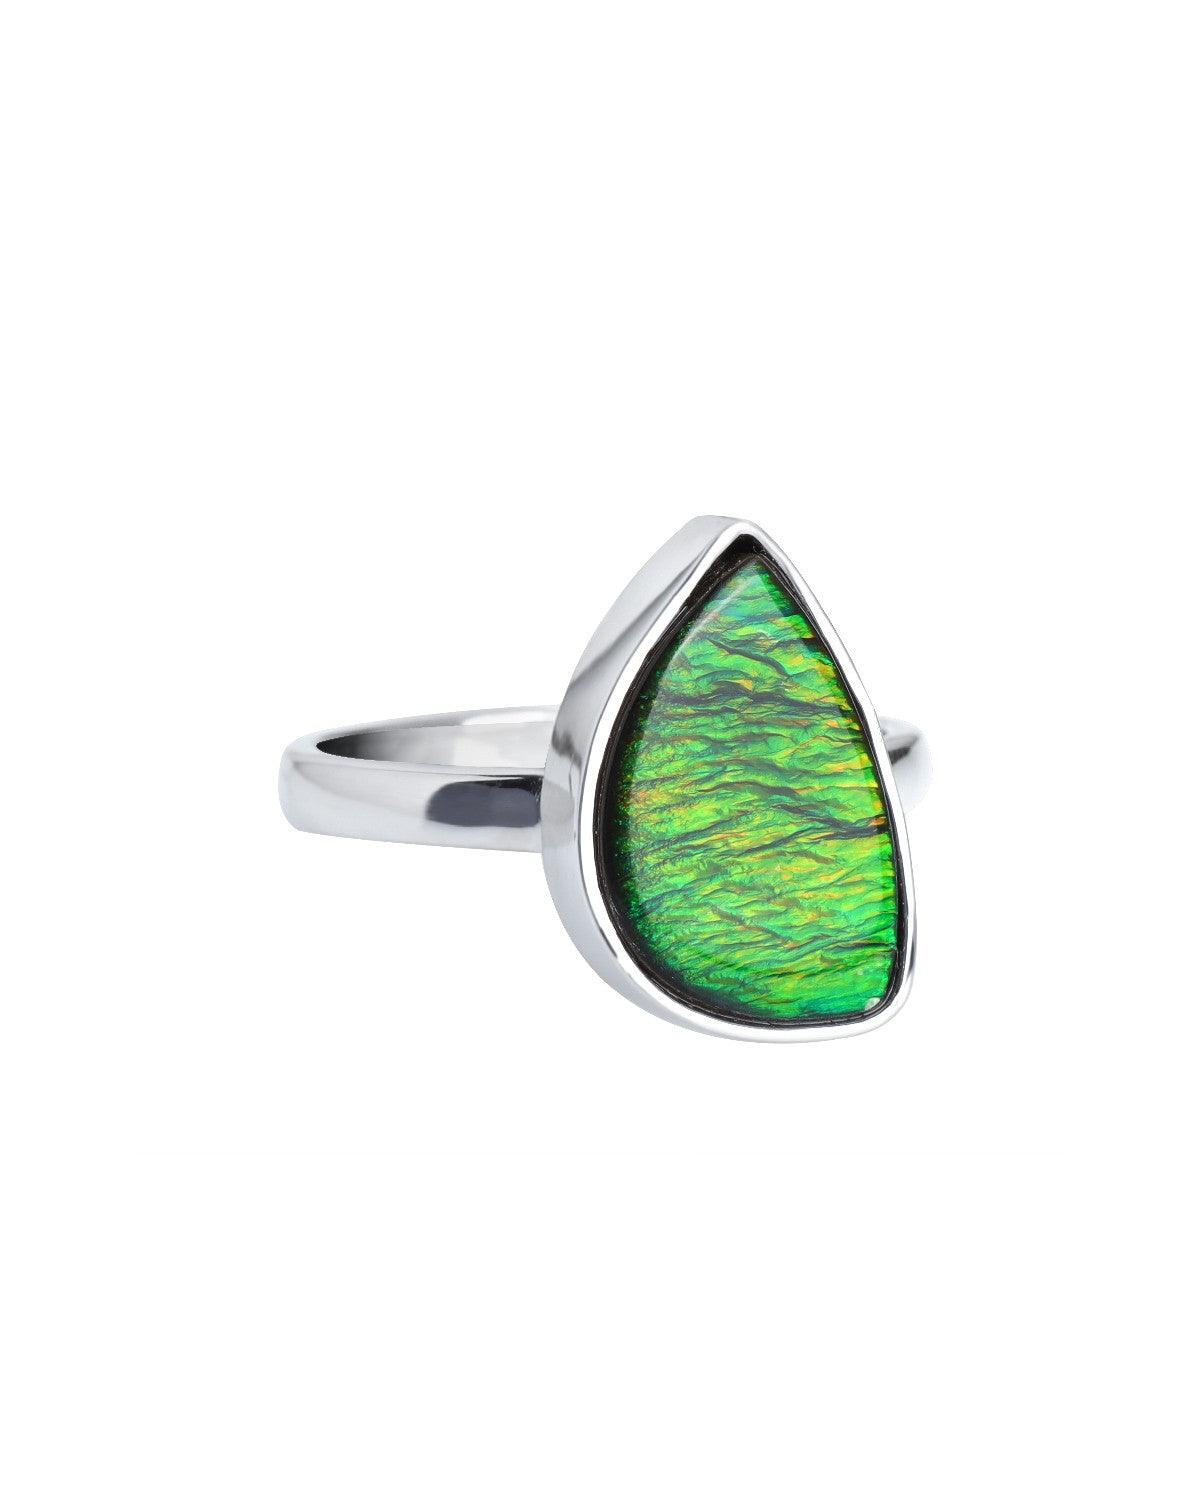 7.20 Ct. Ammolite Ring Solid 925 Sterling Silver Jewelry - YoTreasure